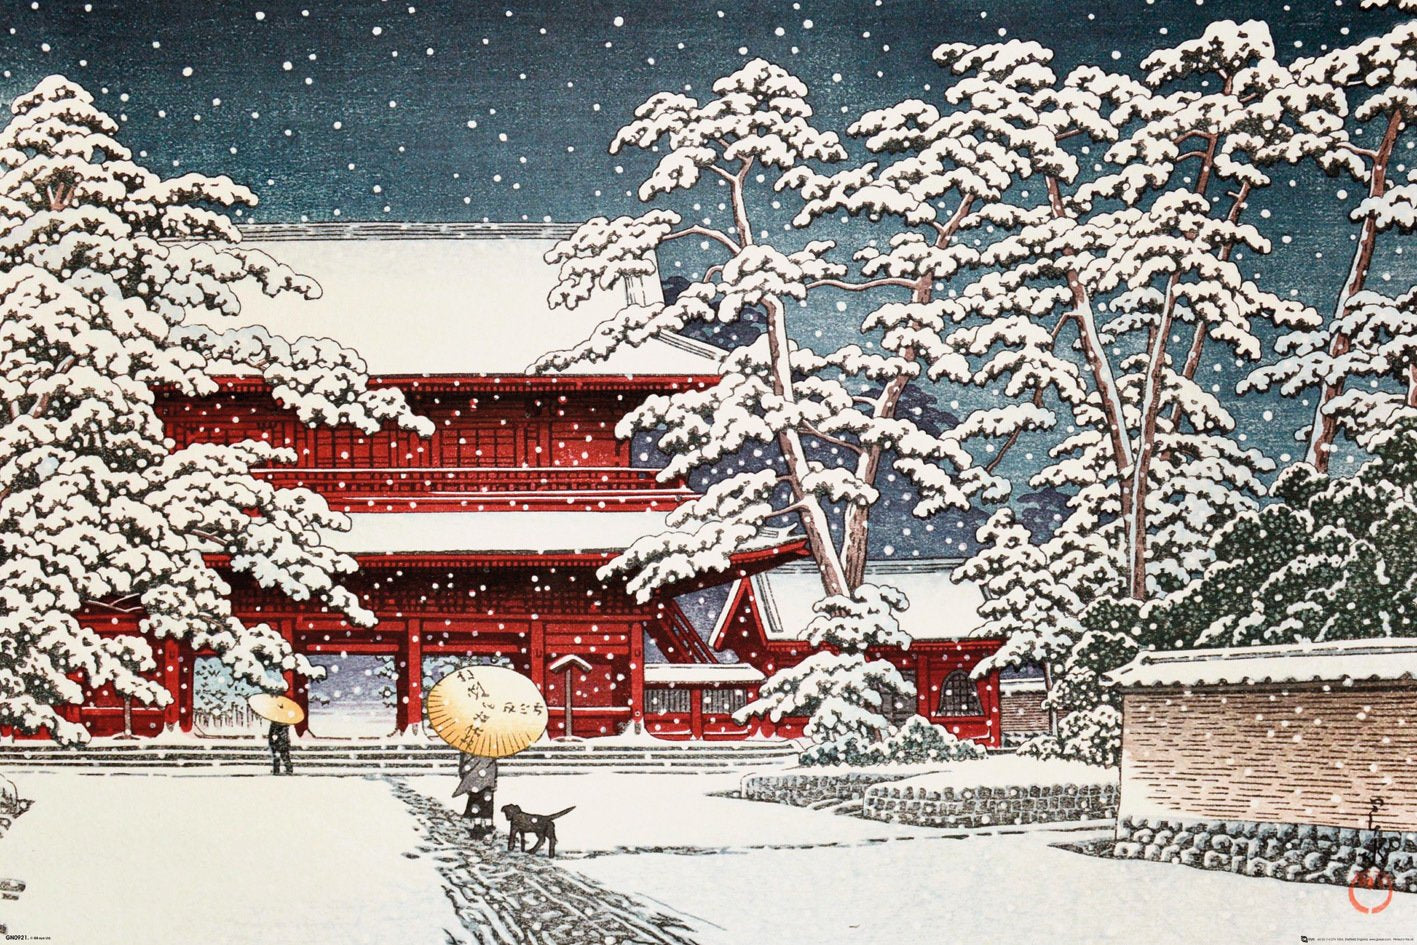 Kawase (Zojo Temple in the Snow) Poster